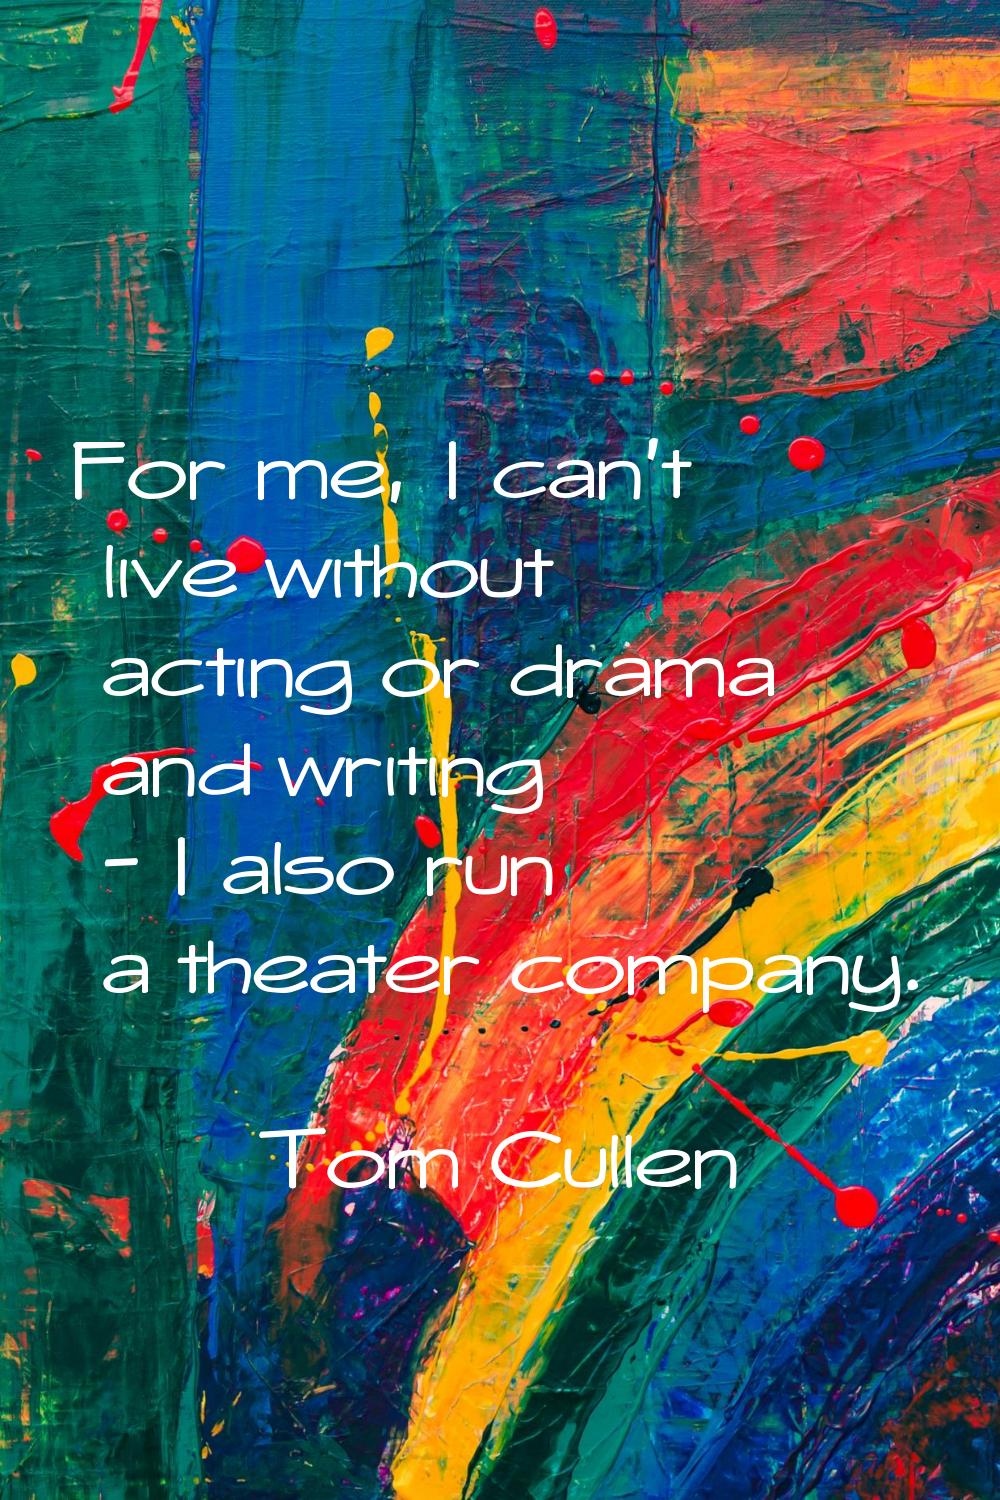 For me, I can't live without acting or drama and writing - I also run a theater company.